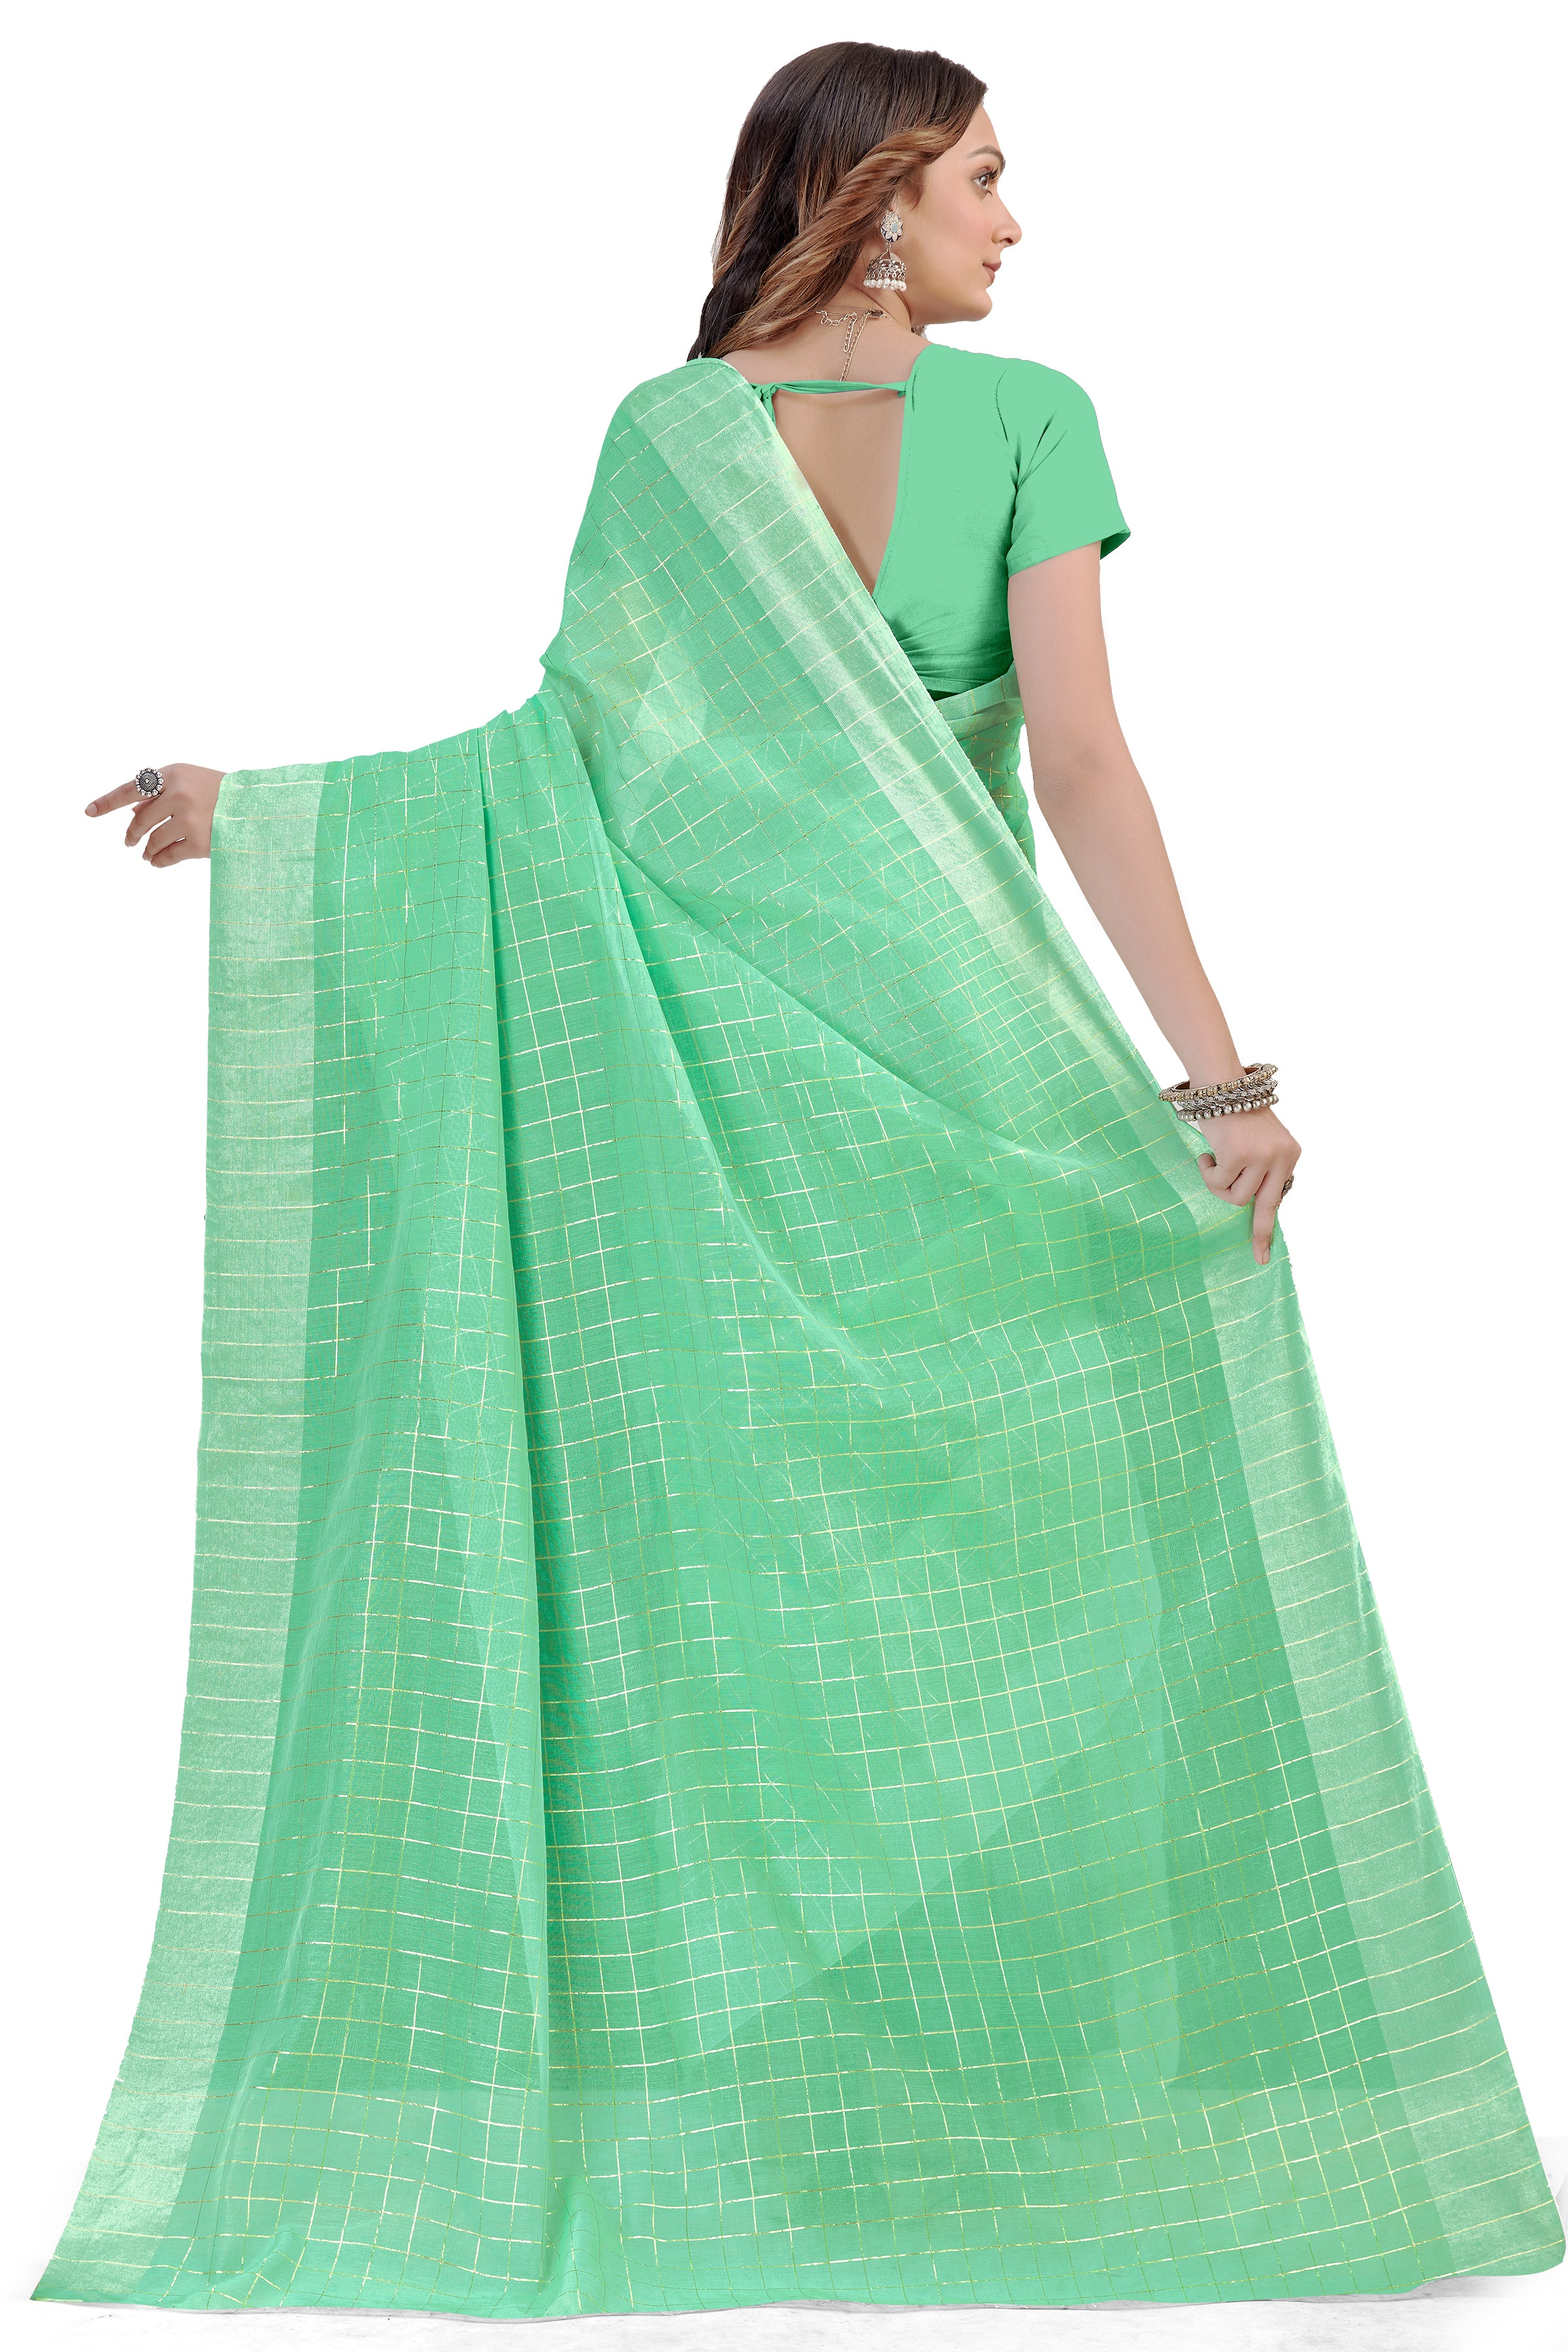 Women's self Woven Checked Daily Wear Cotton Blend Sari With Blouse Piece (Rama) - NIMIDHYA